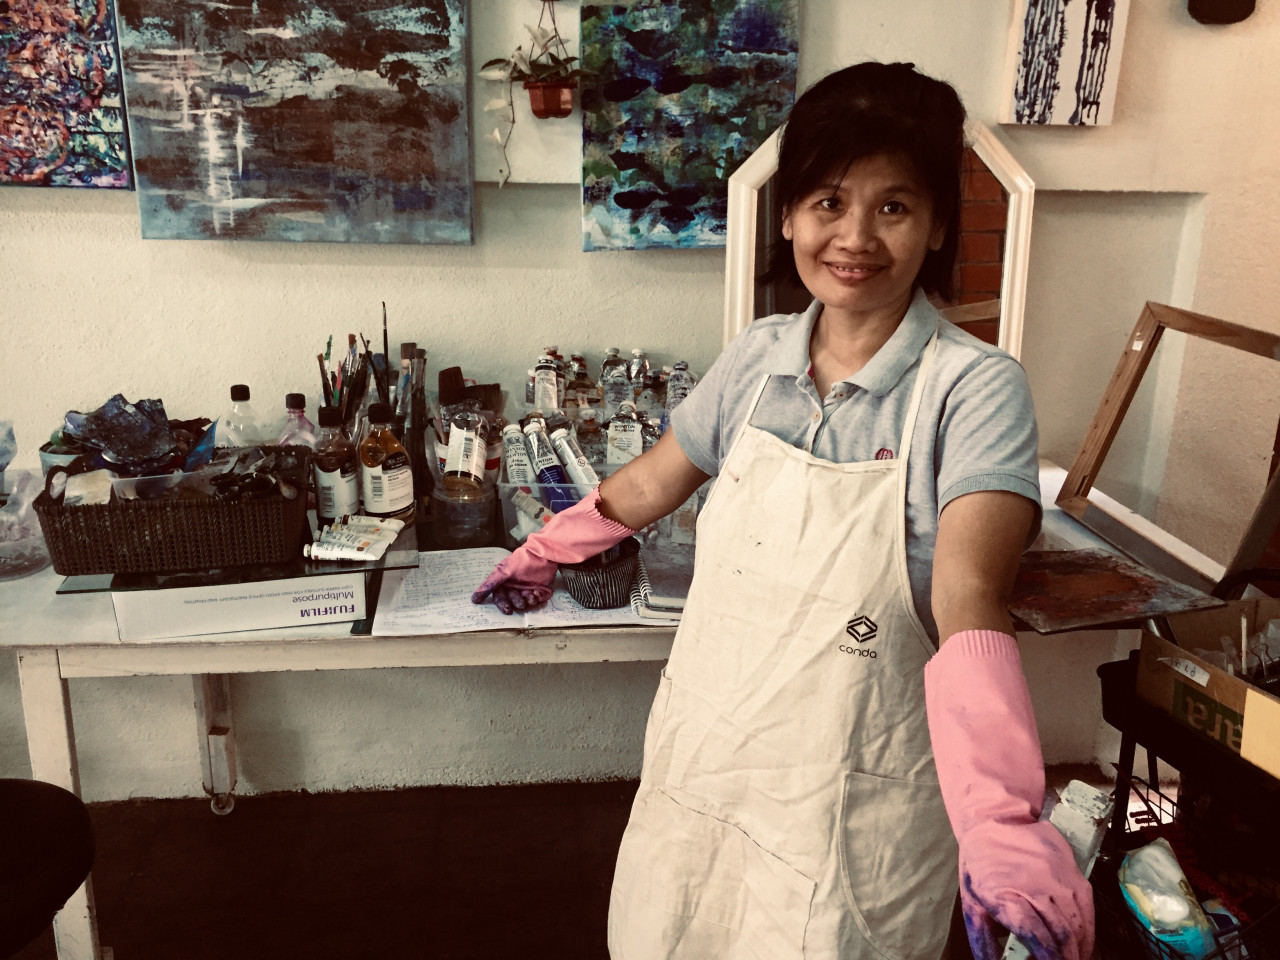 Yau Bee Ling is regarded as one of the country’s foremost painters, with her works exhibited throughout Asia. – Pic courtesy of Wei-Ling Gallery